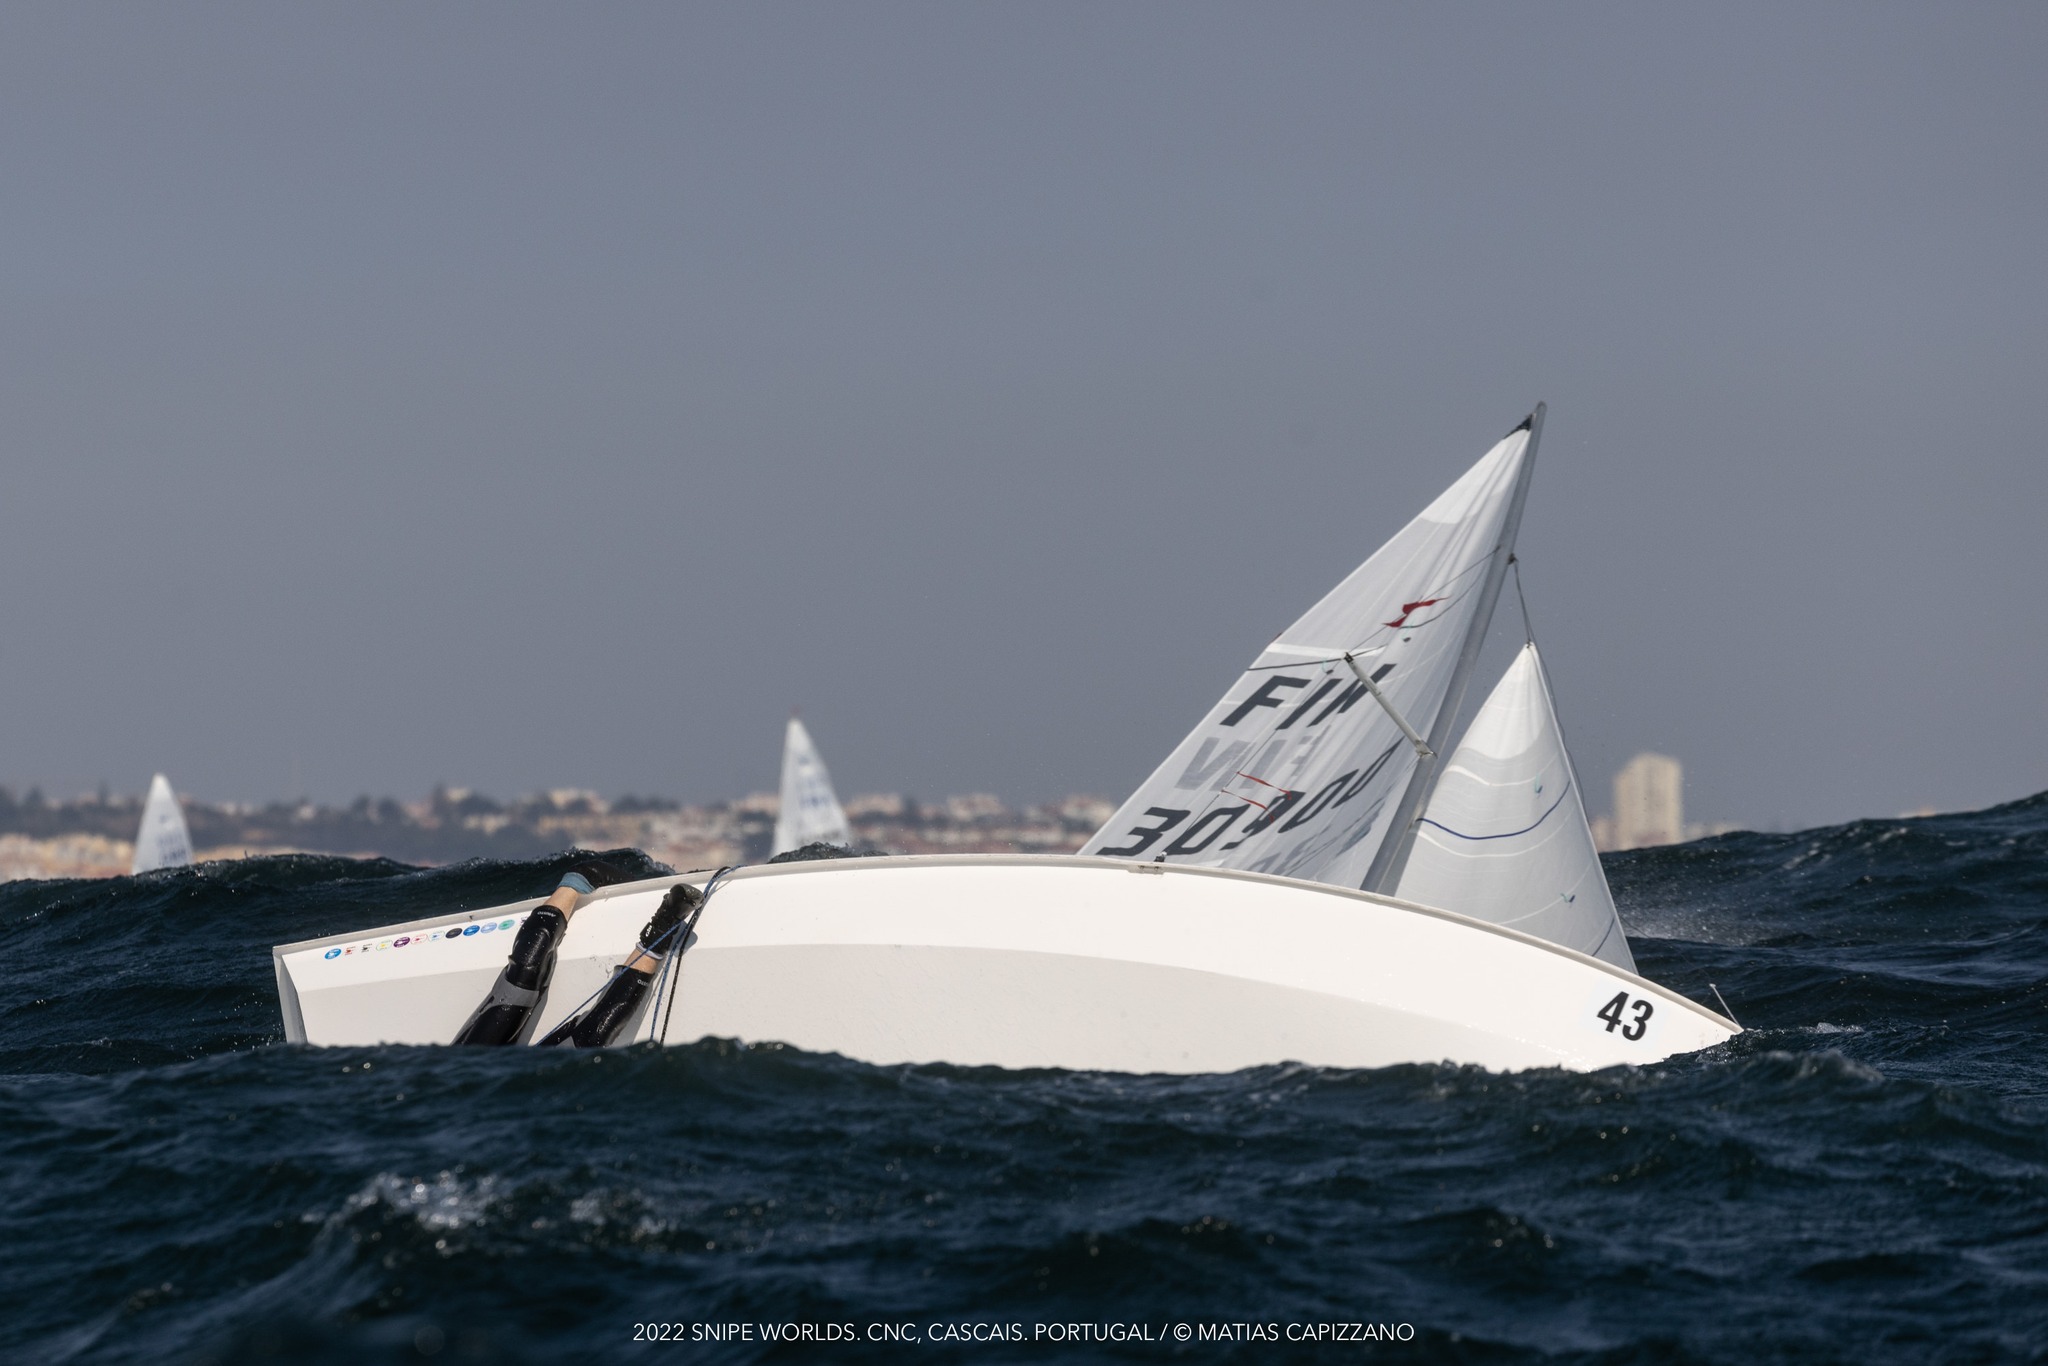 Helping a Capsized Boat in a Race Image